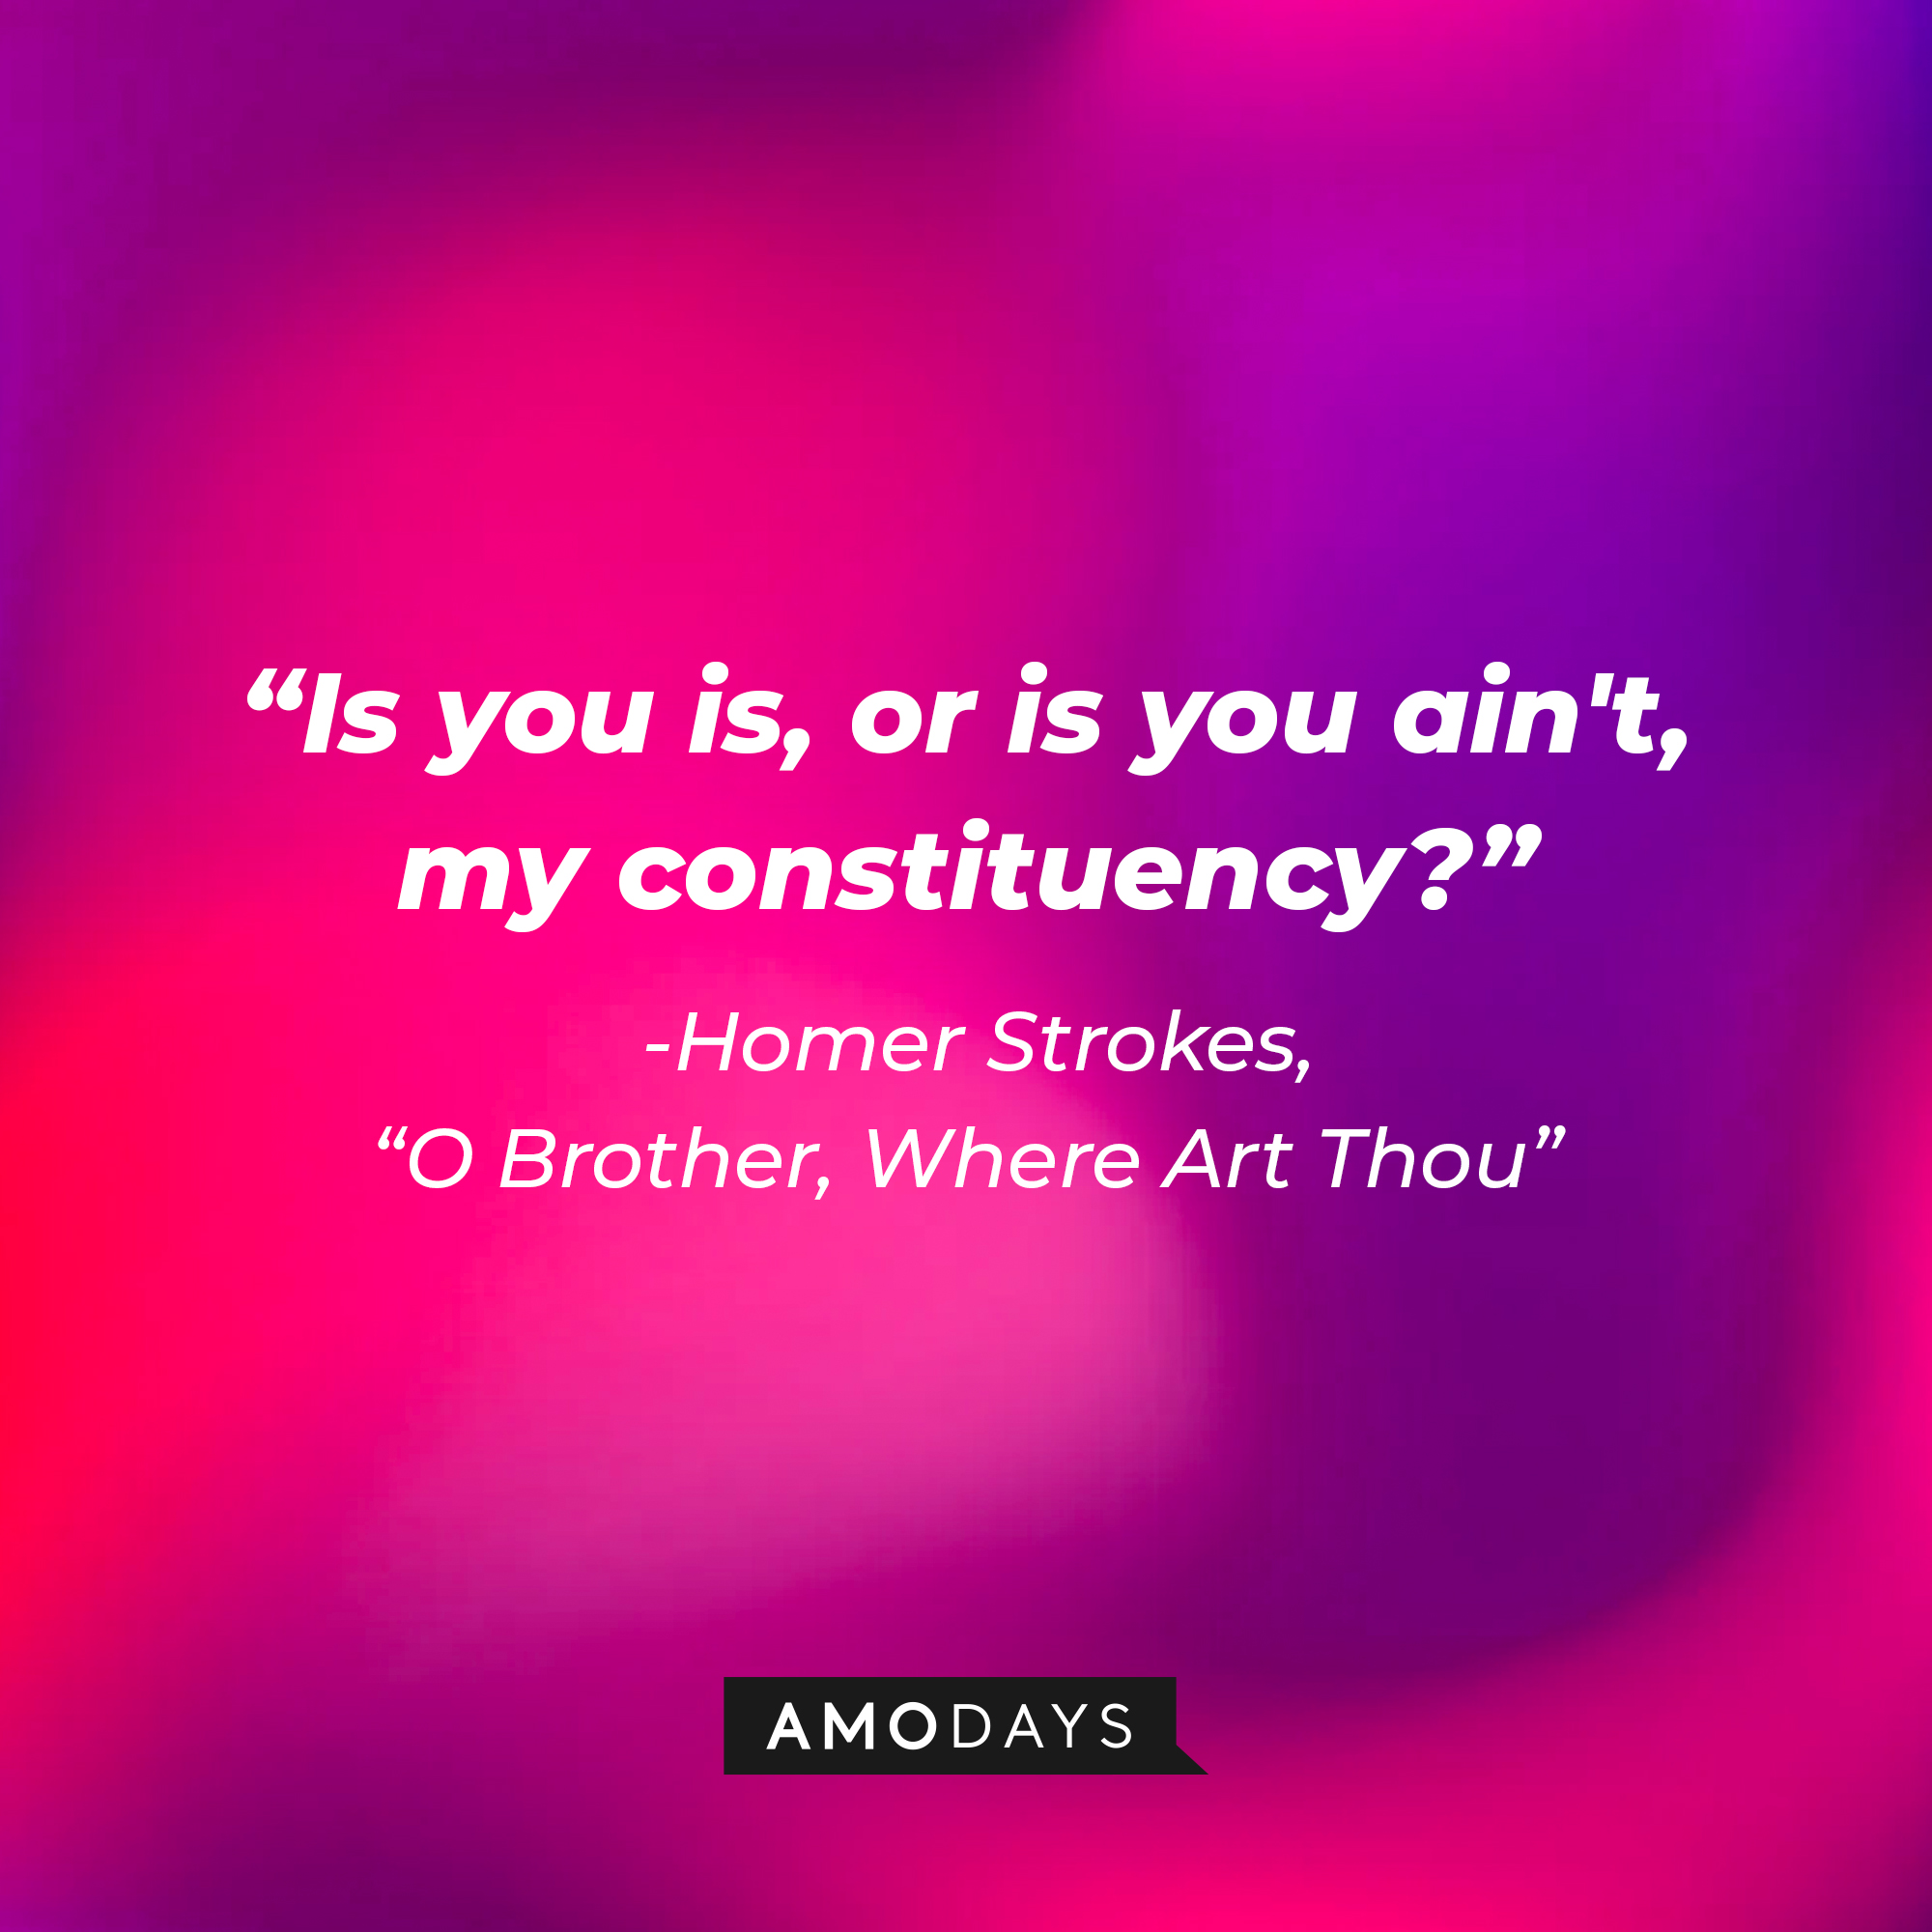 Homer Strokes' quote in "O Brother, Where Art Thou:" "Is you is, or is you ain't, my constituency?" | Source: AmoDays